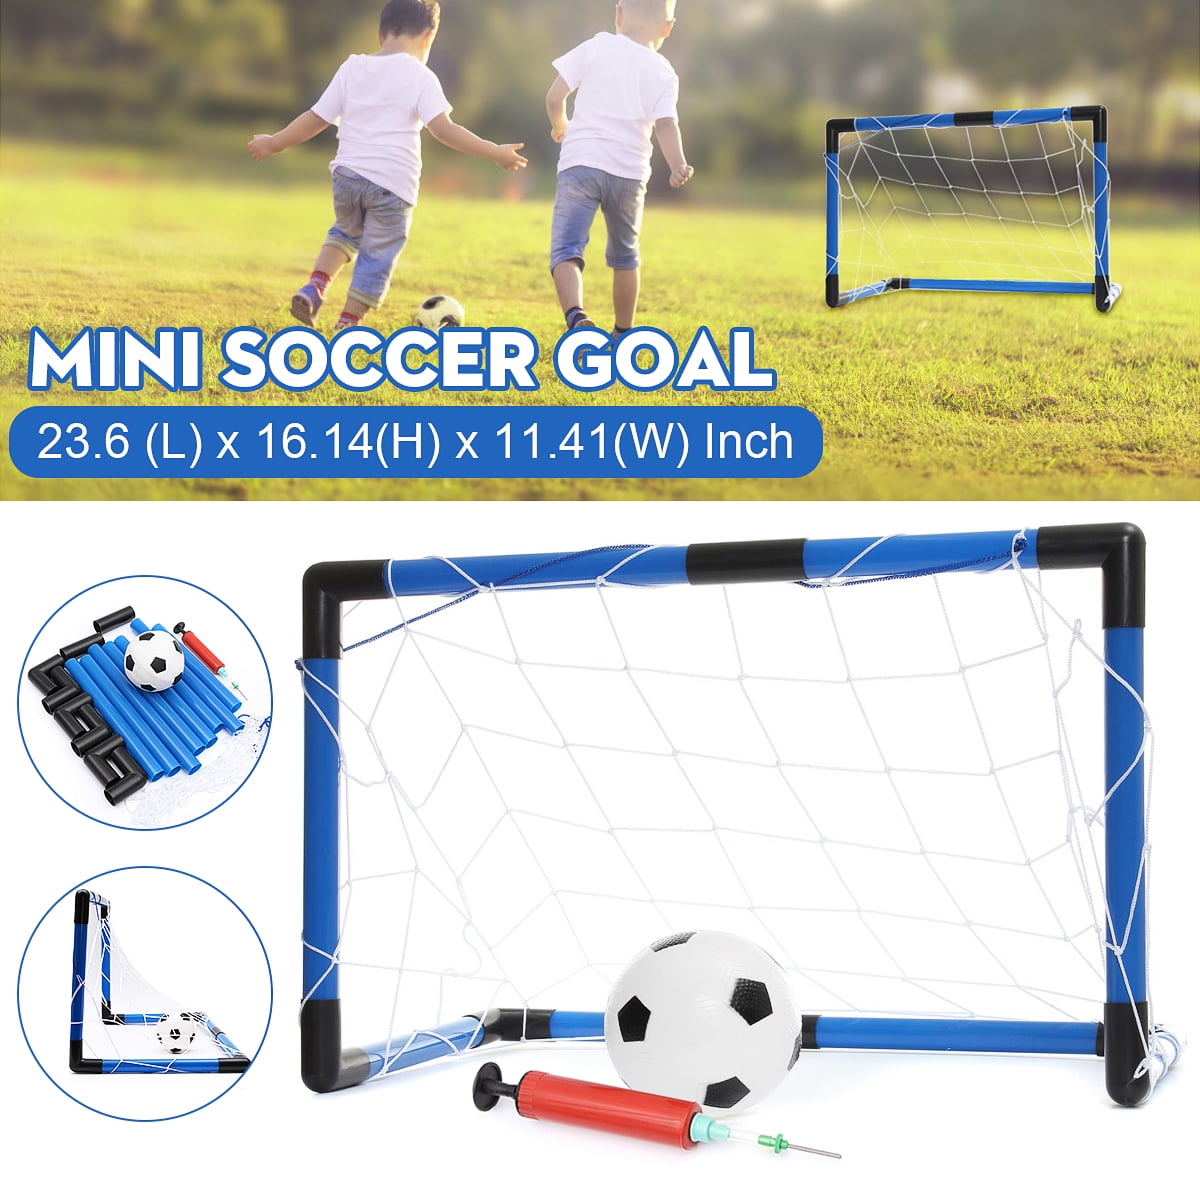 VOUNOT Pop Up Football Goals for Kids Set of 2 2 in 1 Mini Football Target Net Folding and Portable for Indoor & Outdoor Play